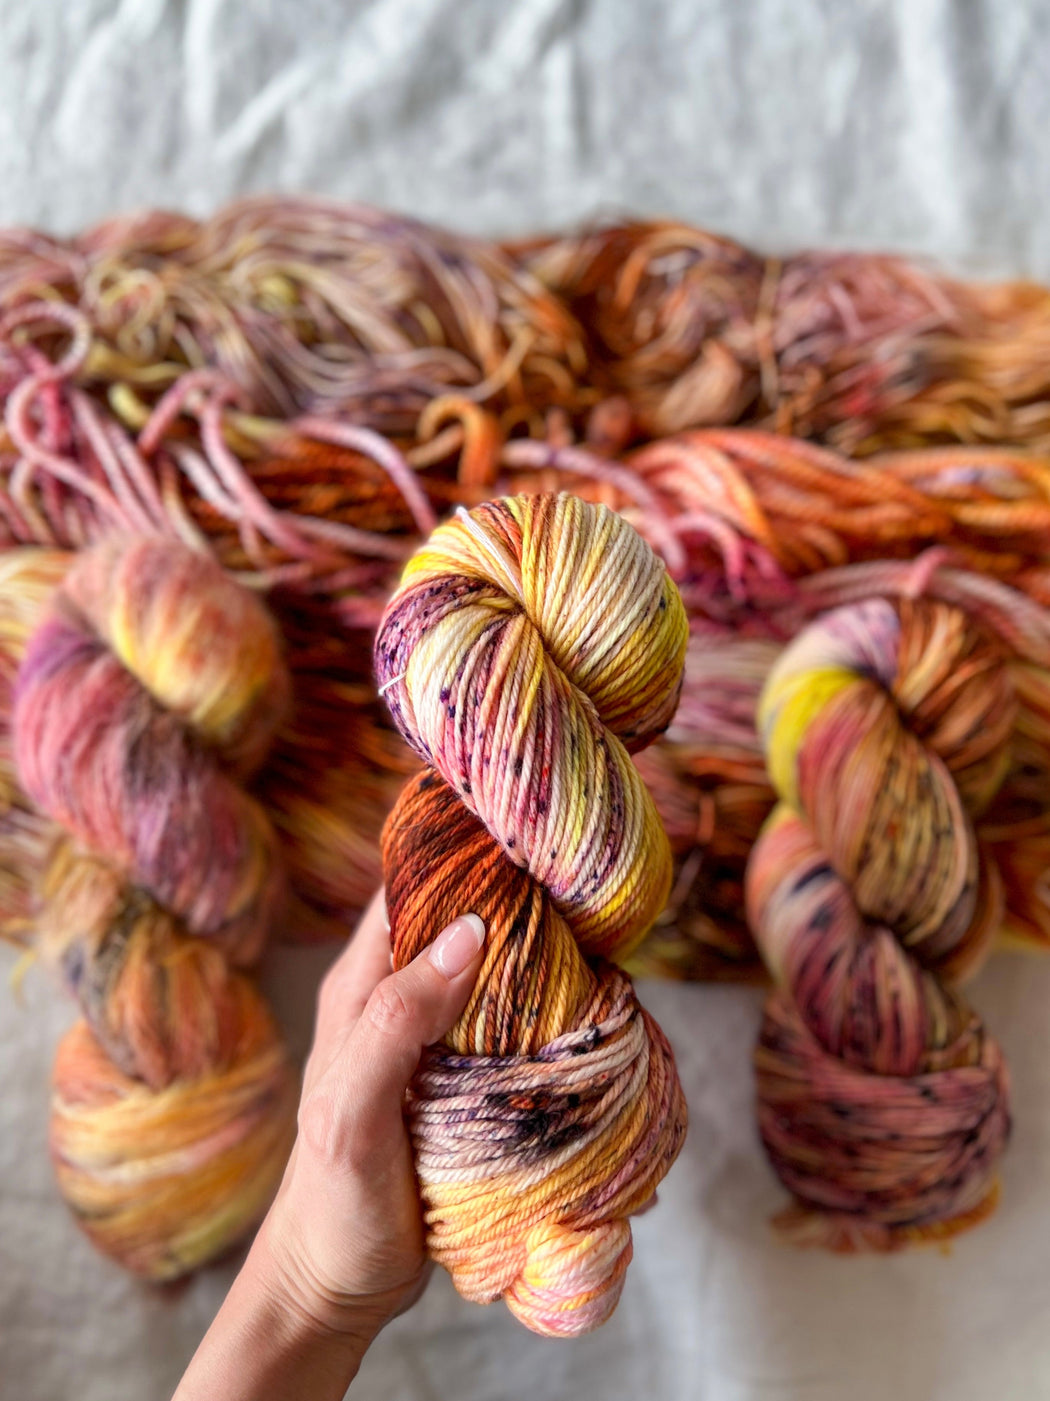 Golden Alley - Ruby and Roses Yarn - Hand Dyed Yarn